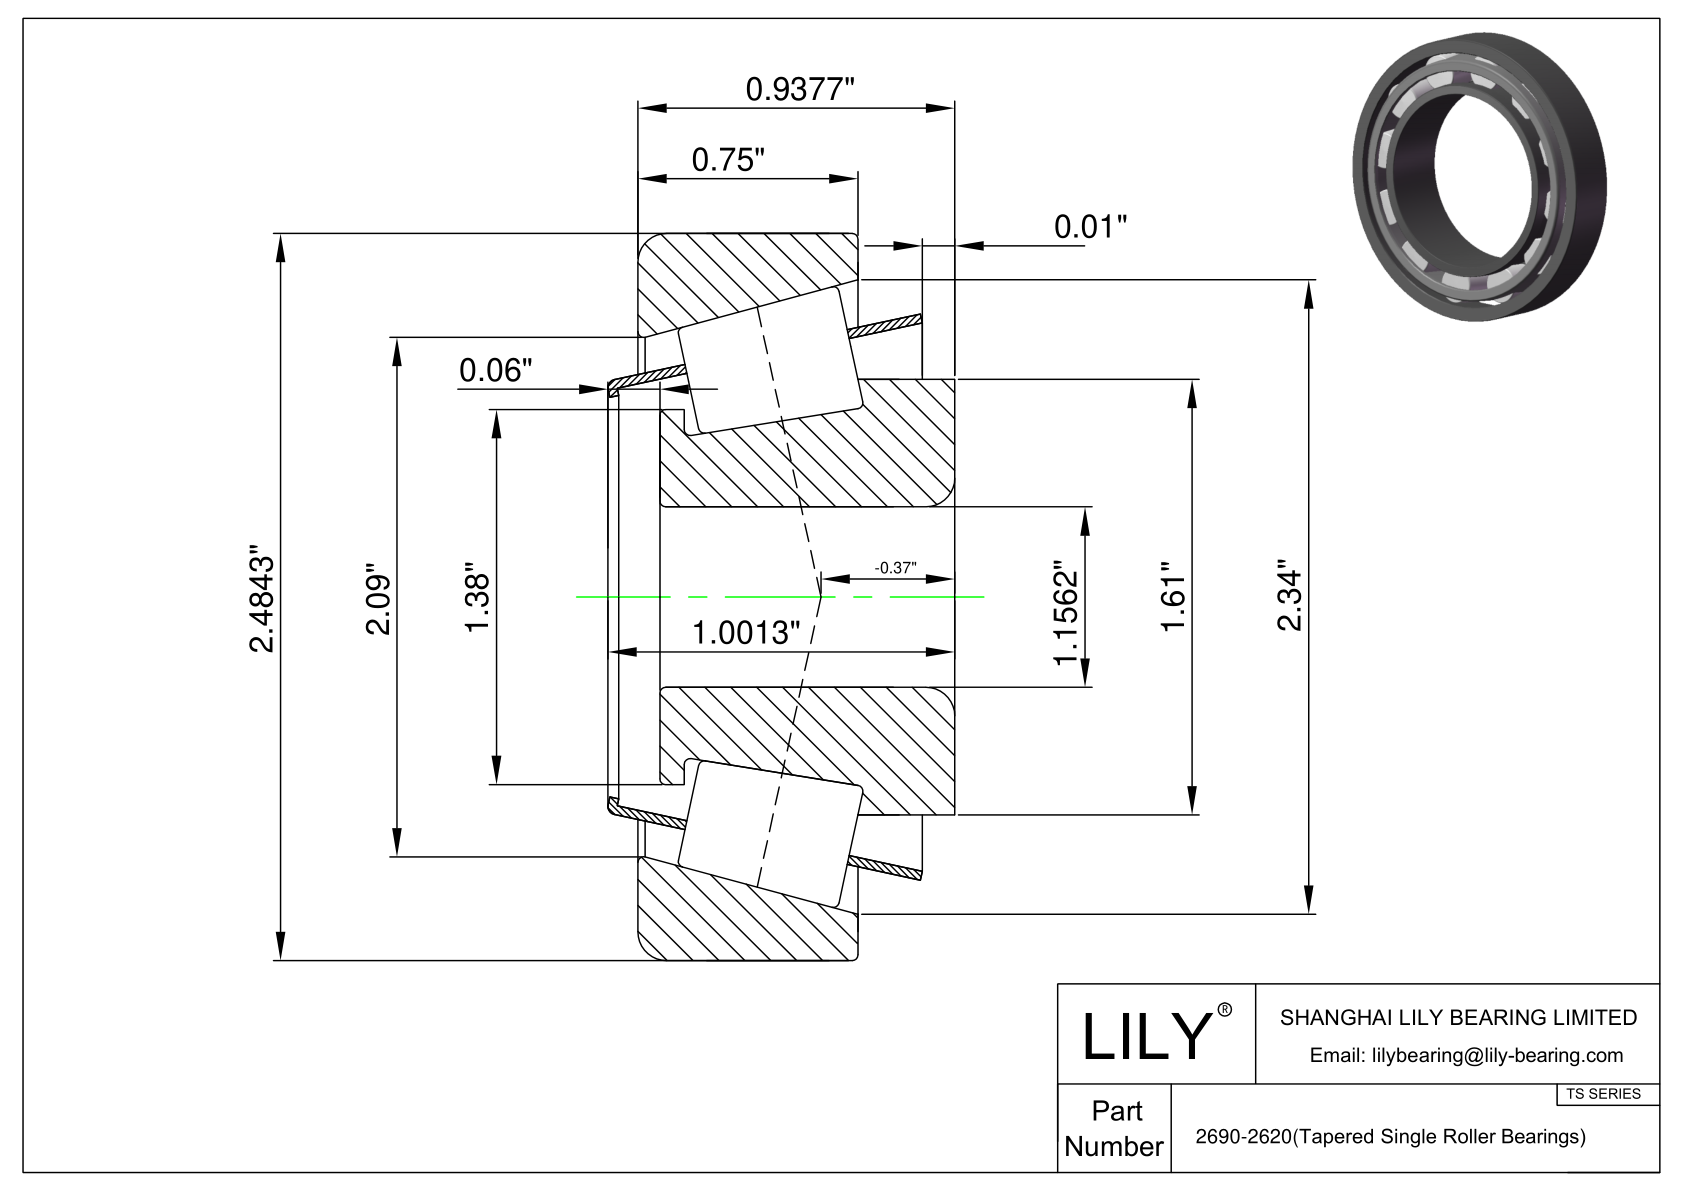 2690-2620 TS (Tapered Single Roller Bearings) (Imperial) cad drawing